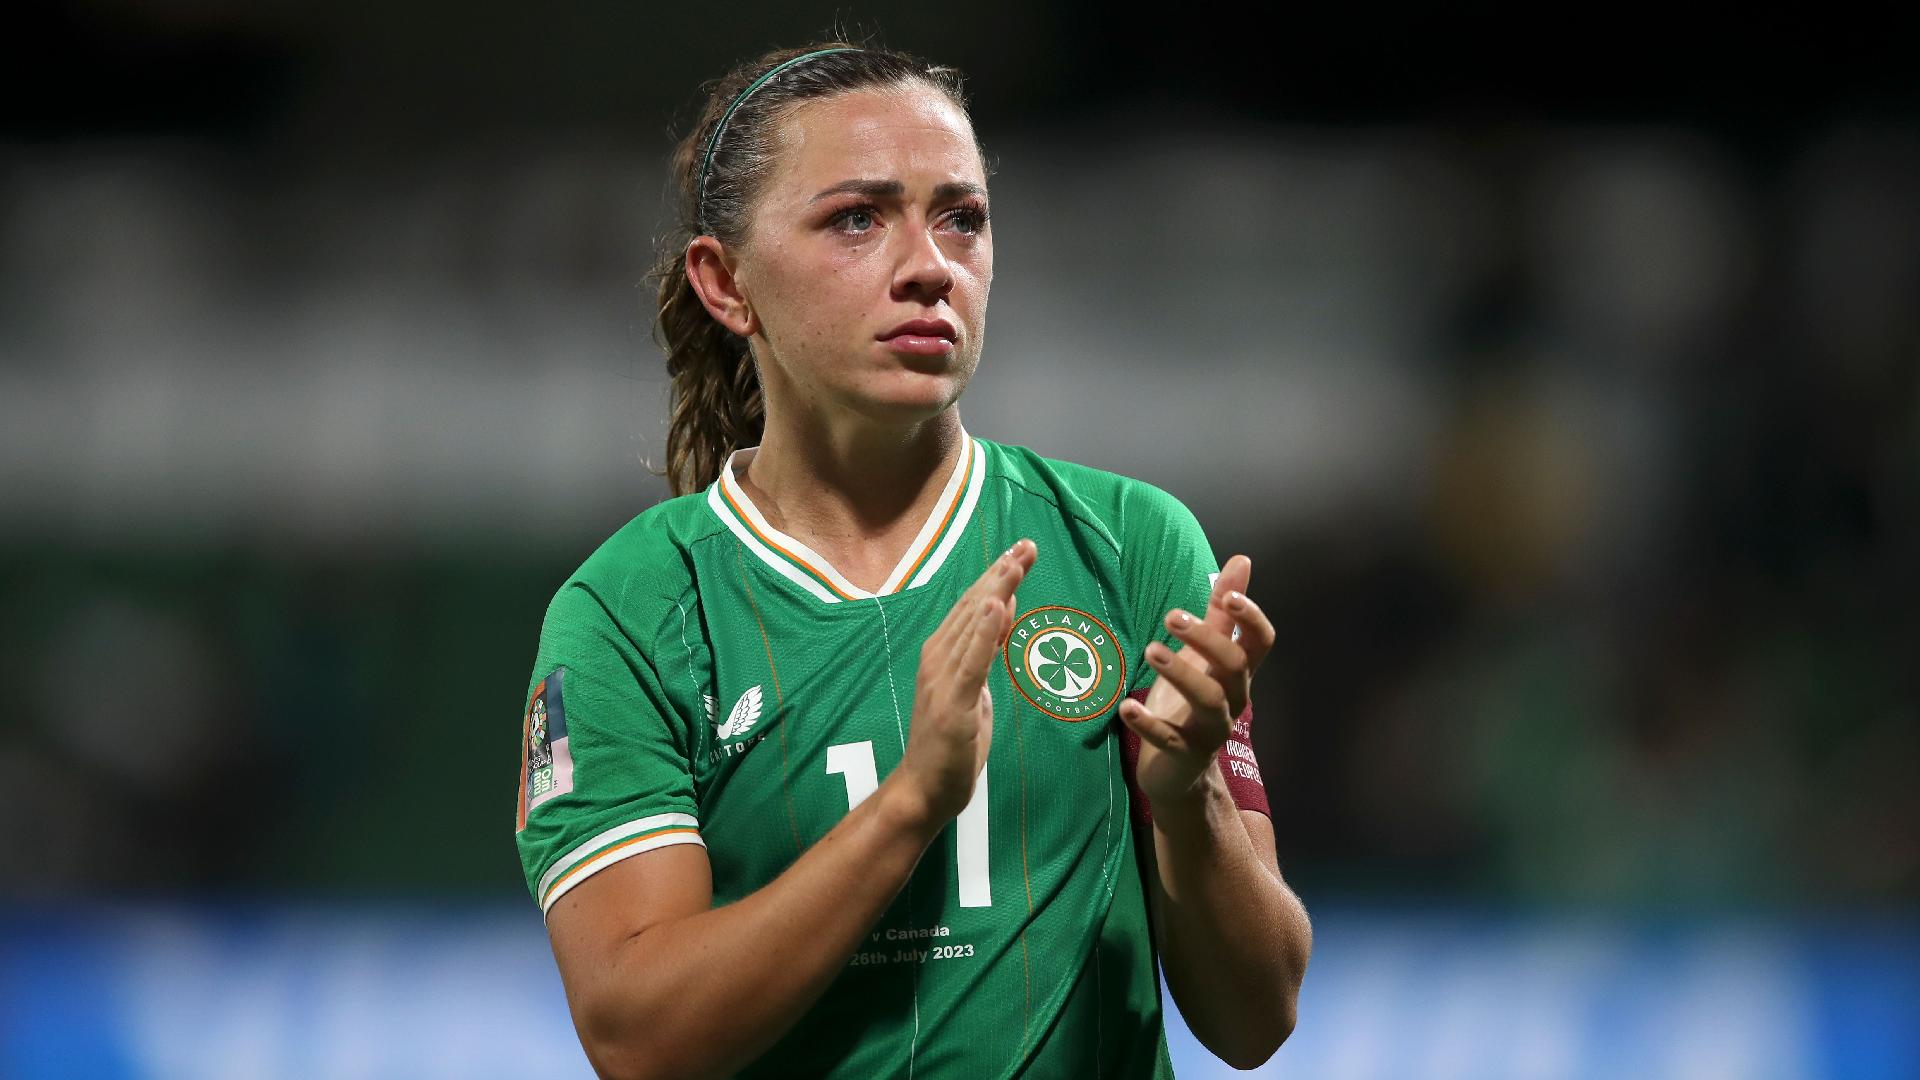 It's disappointing -- Ireland Women's Captain, Katie McCabe